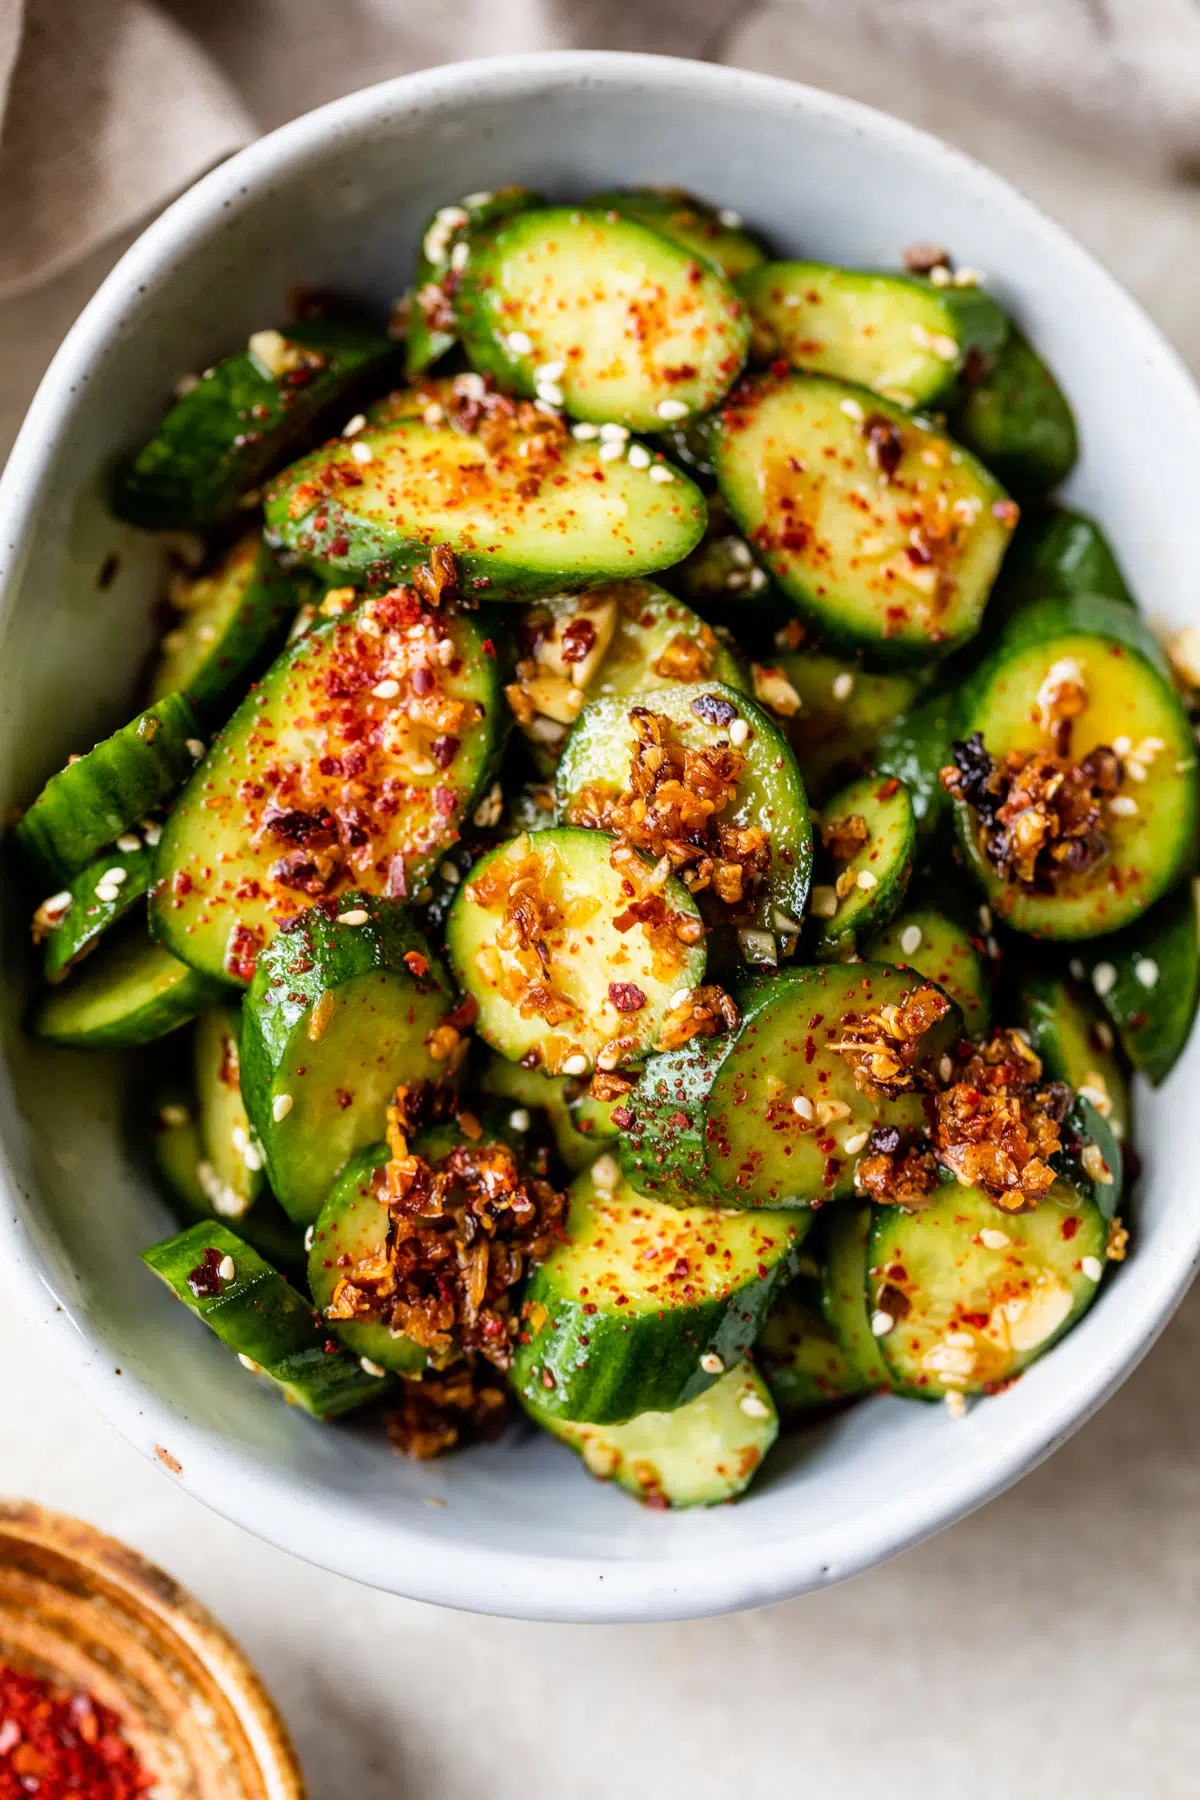 sliced cucumbers in a bowl topped with chili flakes